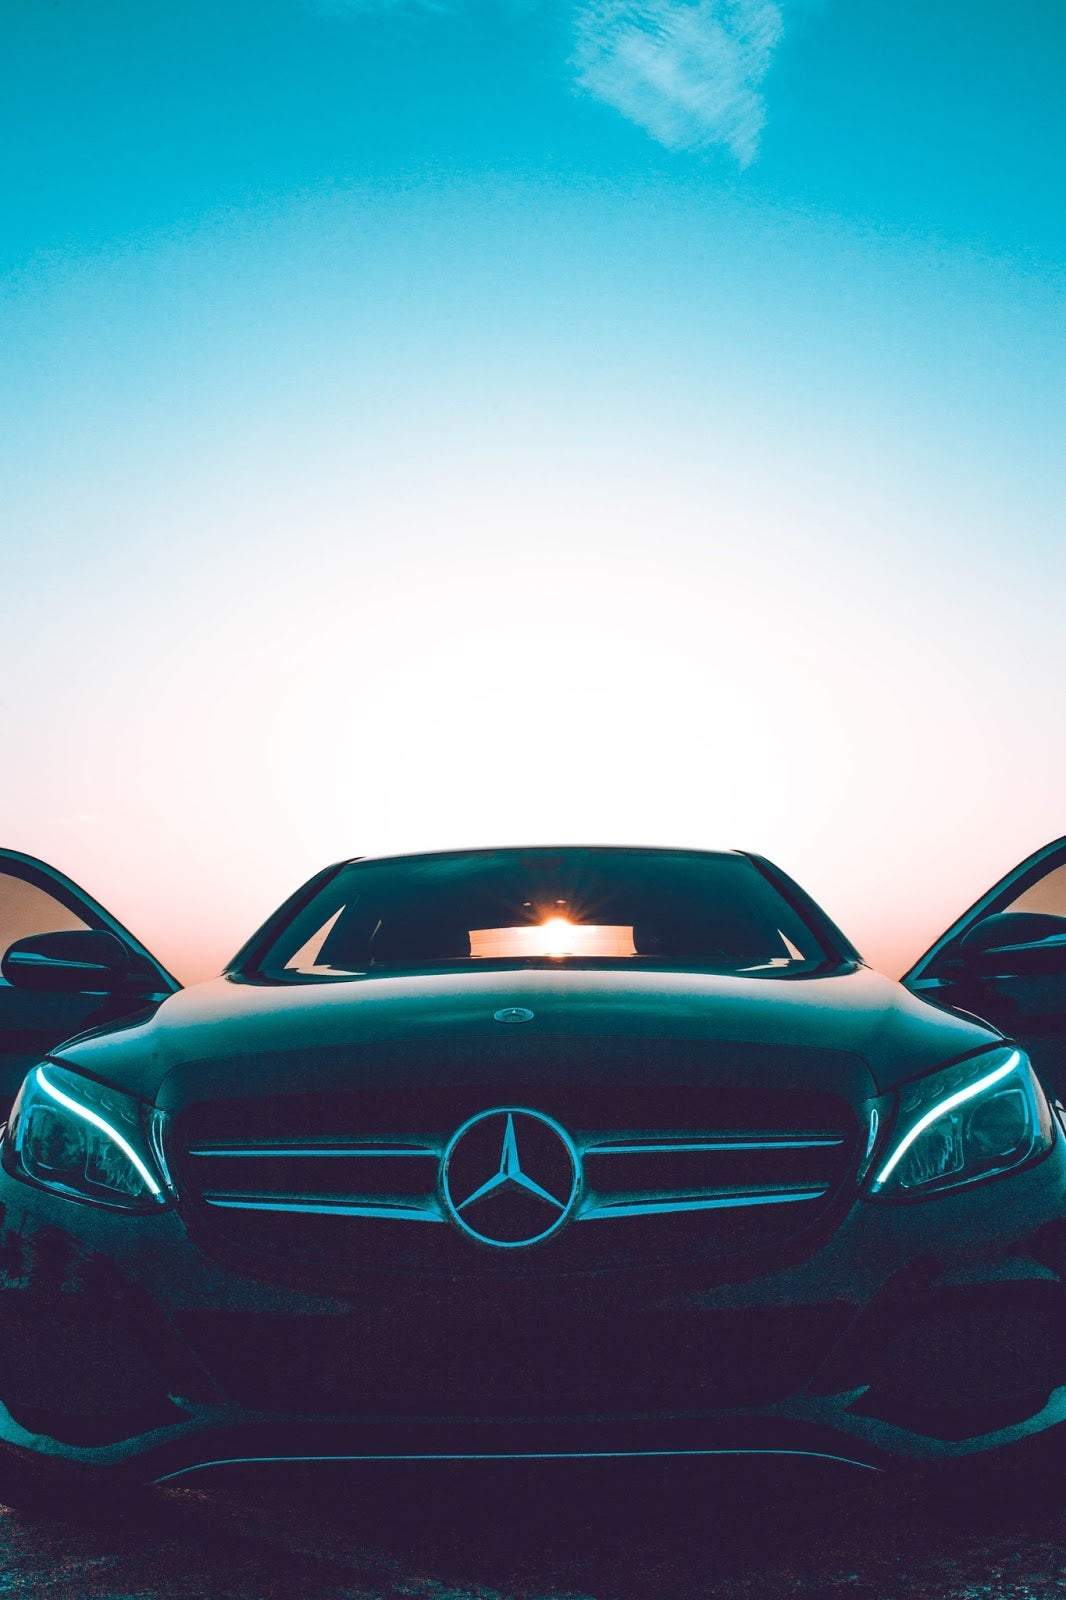 Photos: After Photo Shoot, Nigerian Photographer Gets Attention From Mercedes Benz